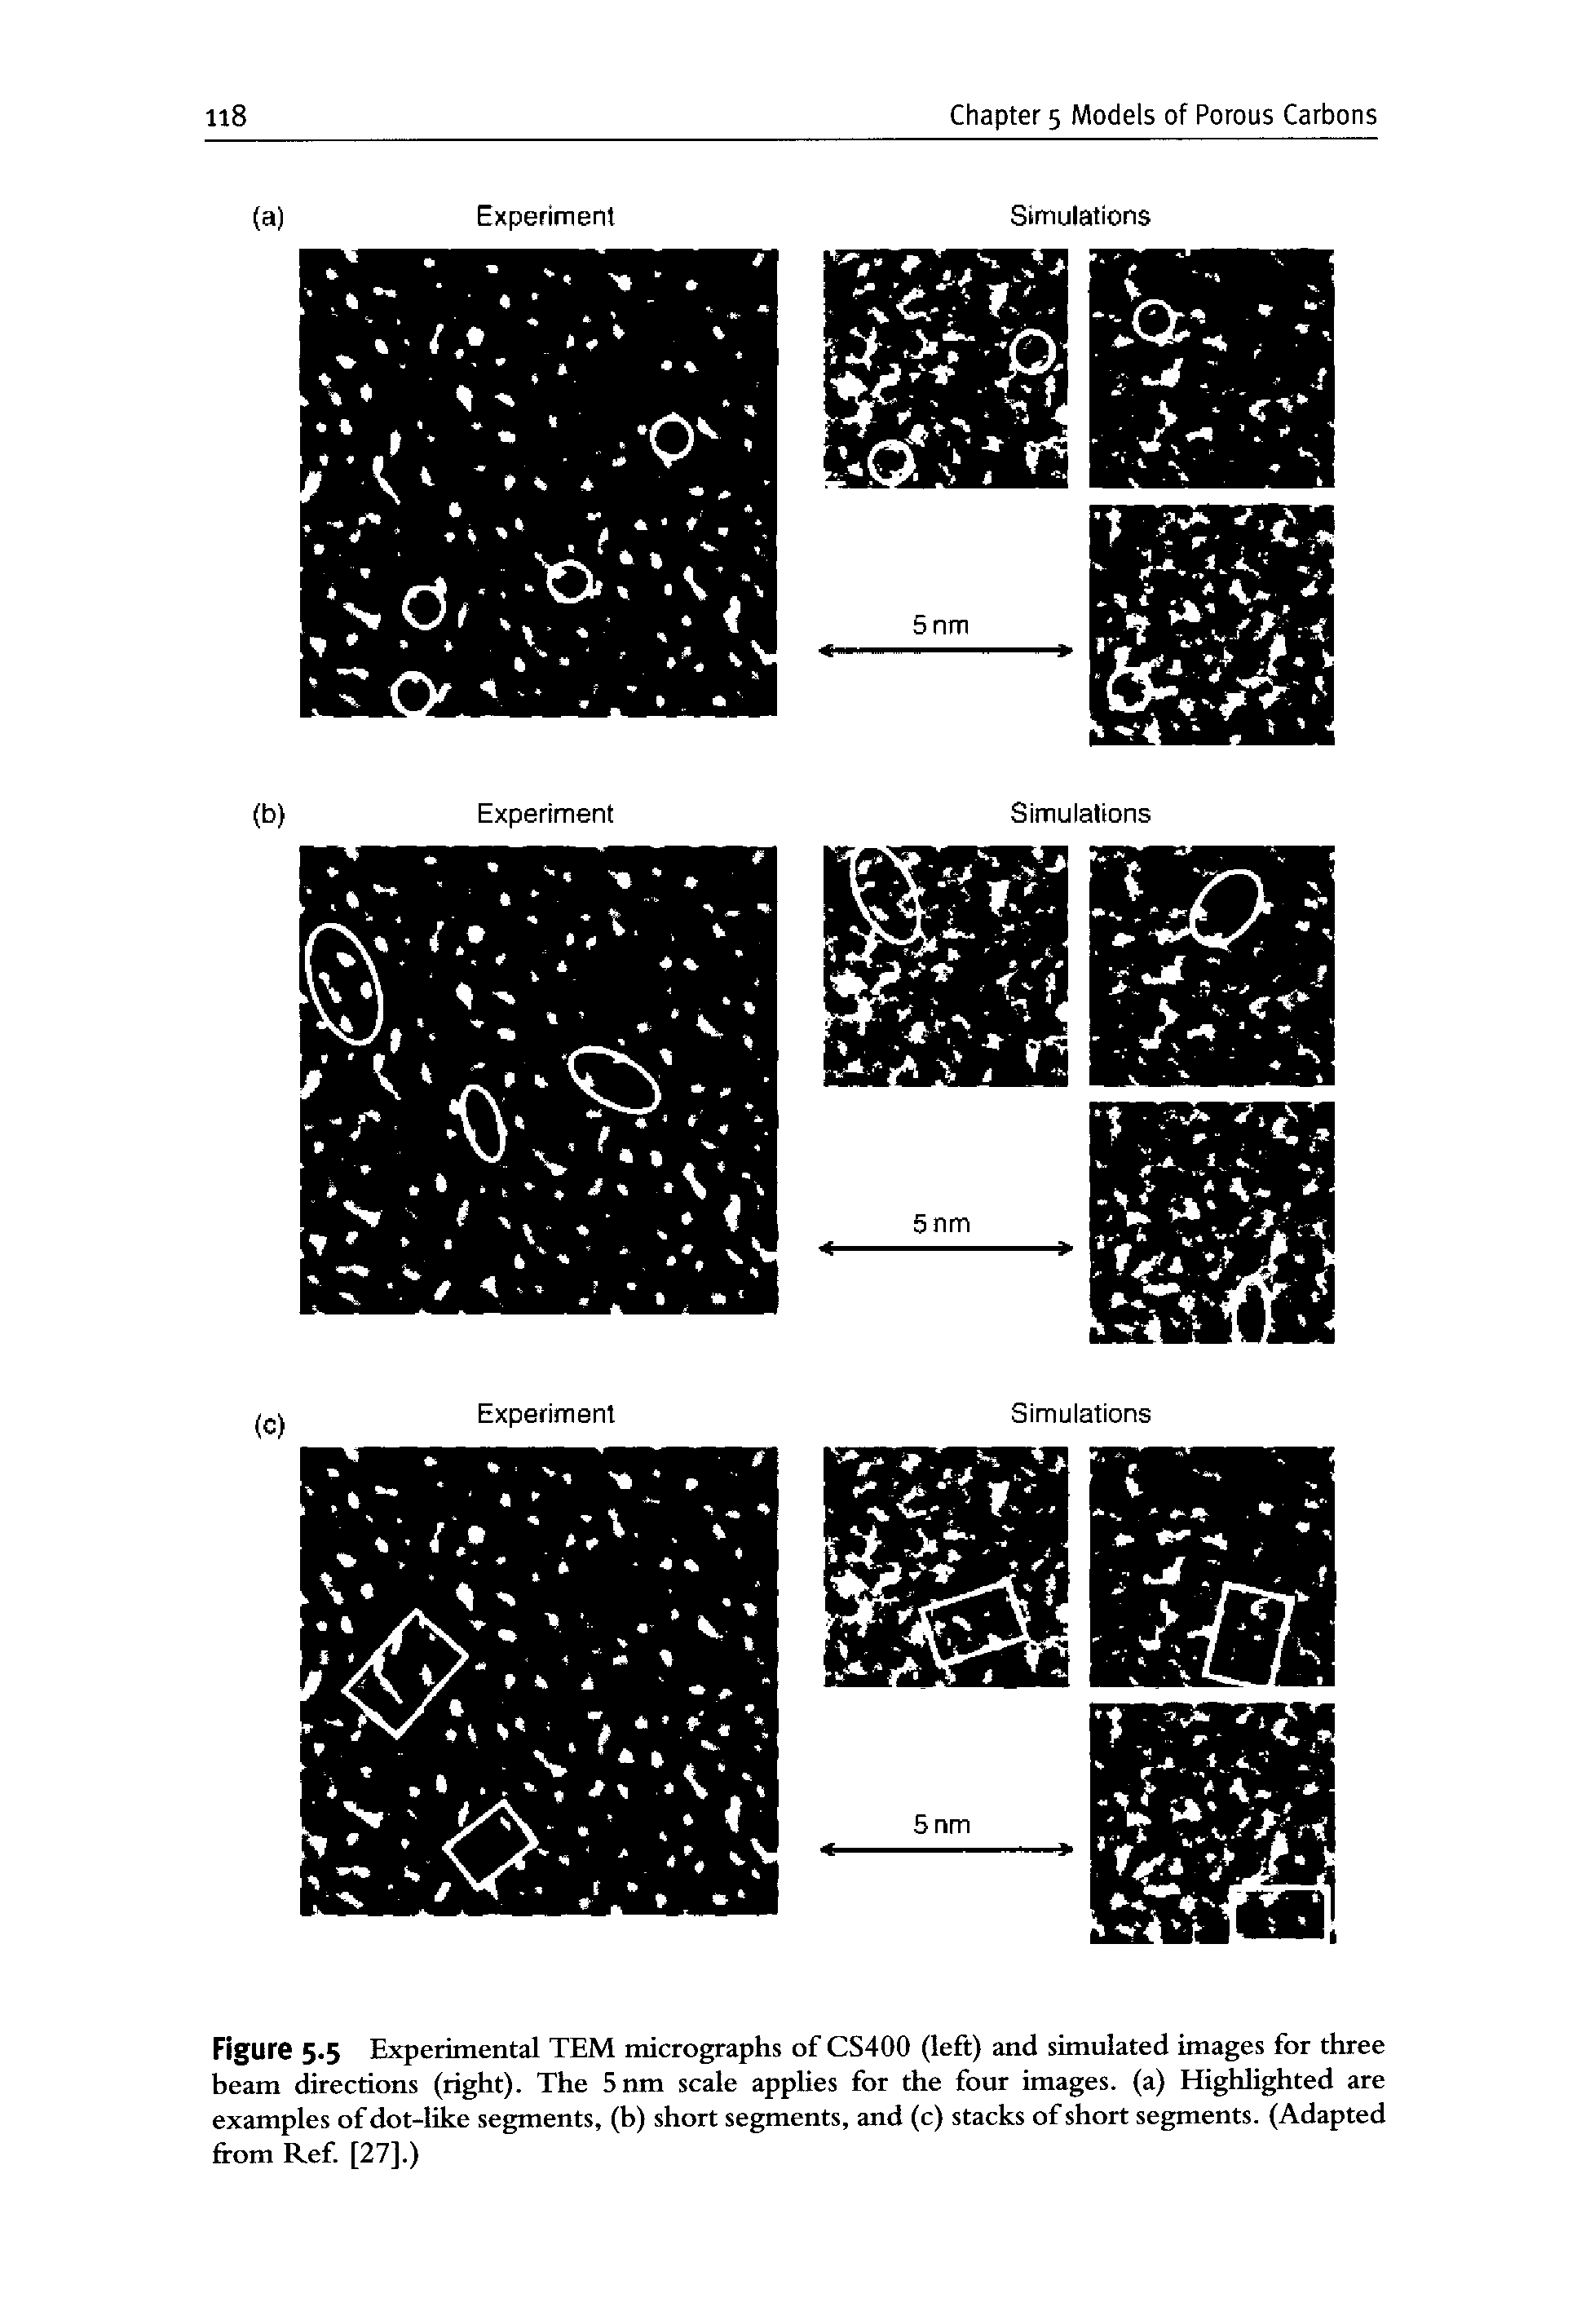 Figure 5.5 Experimental TEM micrographs of CS400 (left) and simulated images for three beam directions (right). The 5nm scale applies for the four images, (a) Highlighted are examples of dot-like segments, (h) short segments, and (c) stacks of short segments. (Adapted from Ref. [27].)...